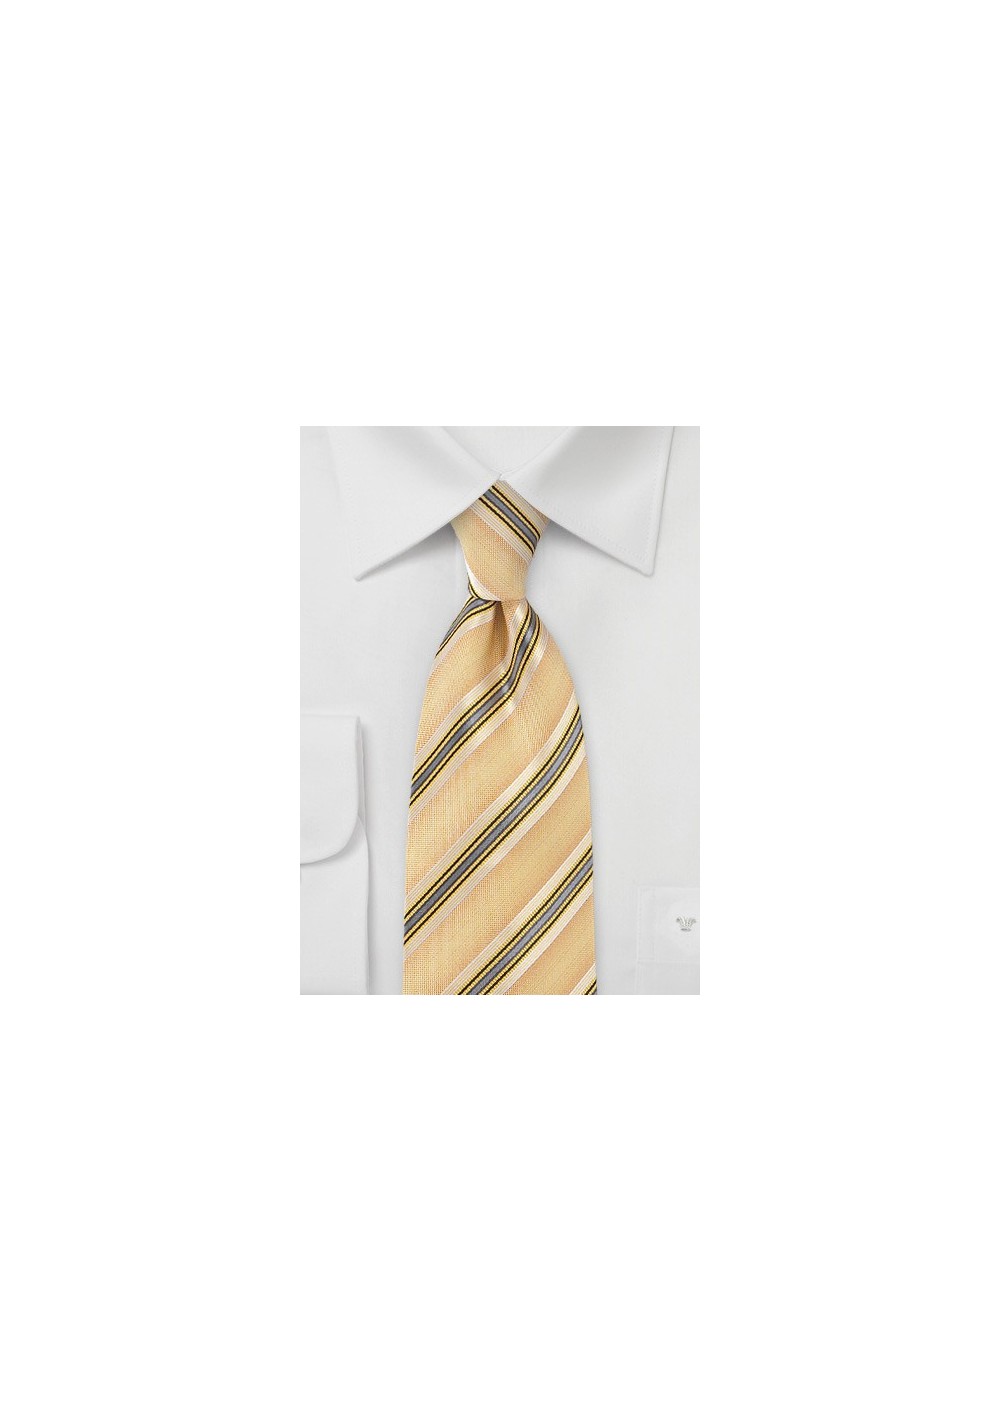 Retro Striped Tie in Yellows and Charcoals